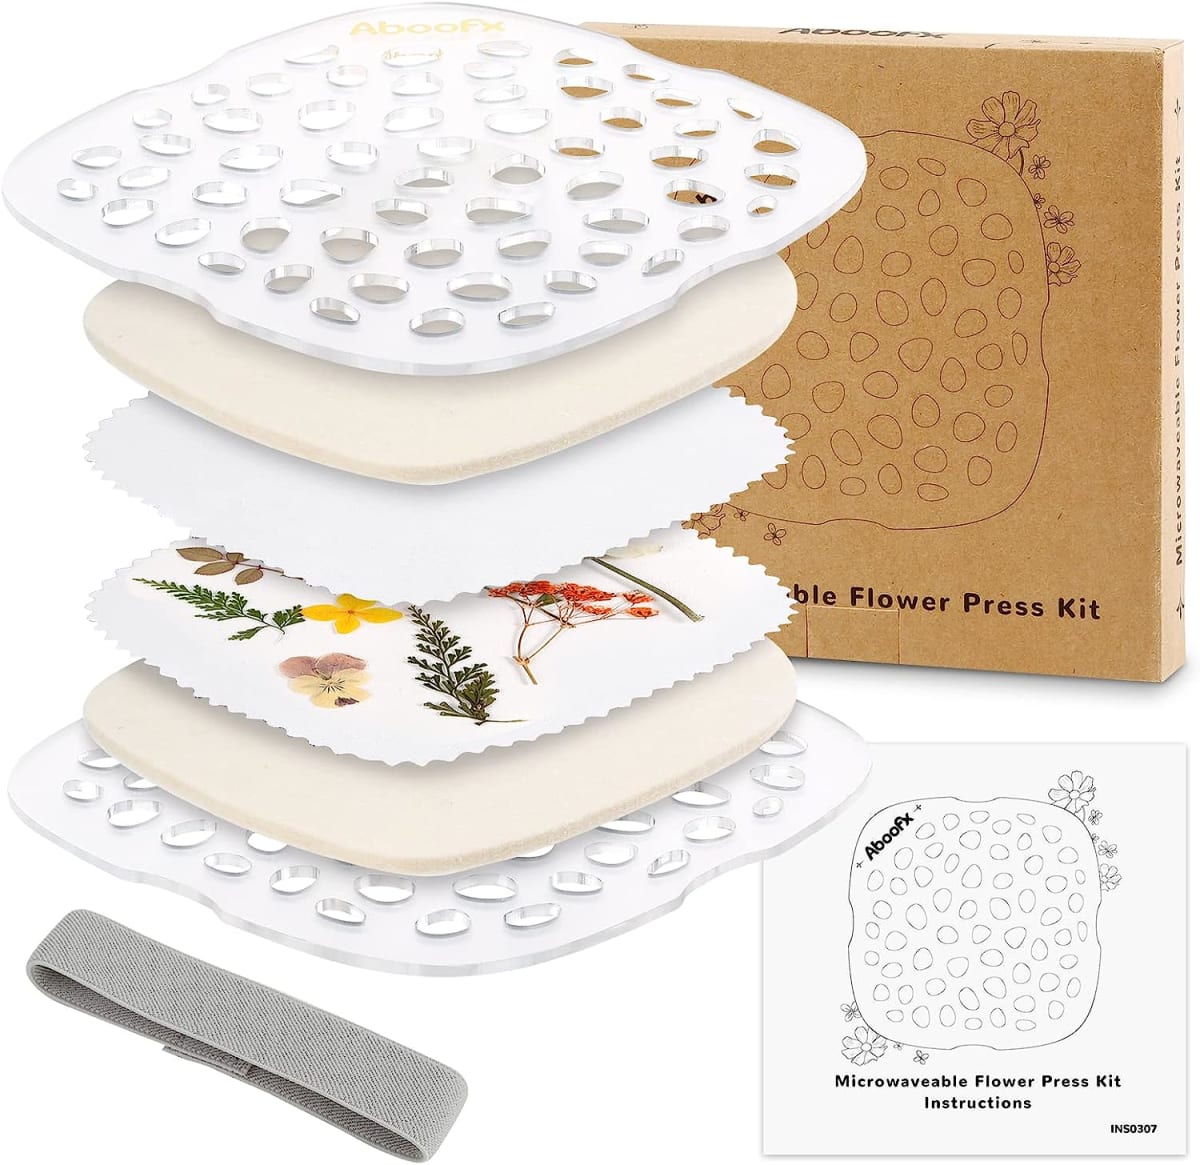 Quickly Flower Pressing Kit